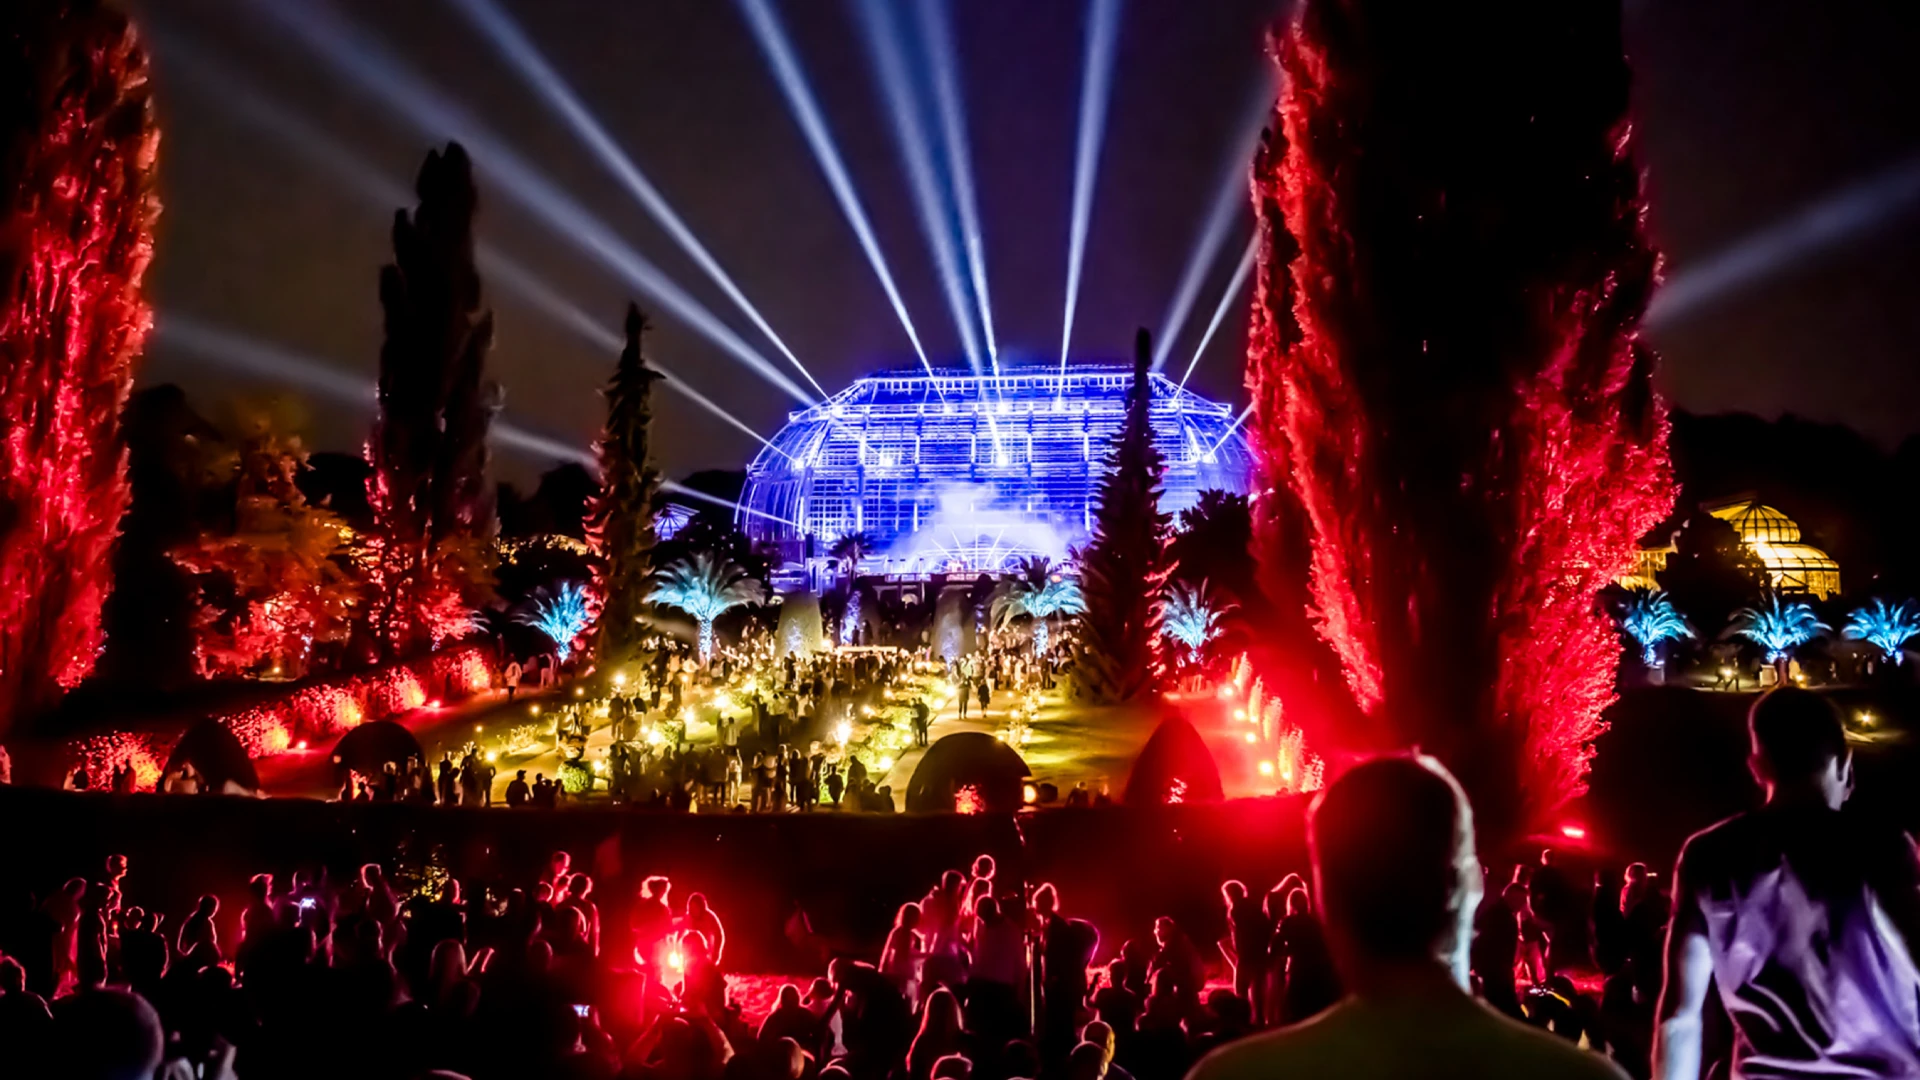 A picture shows the Botanical Night in the Berlin Botanical Garden.